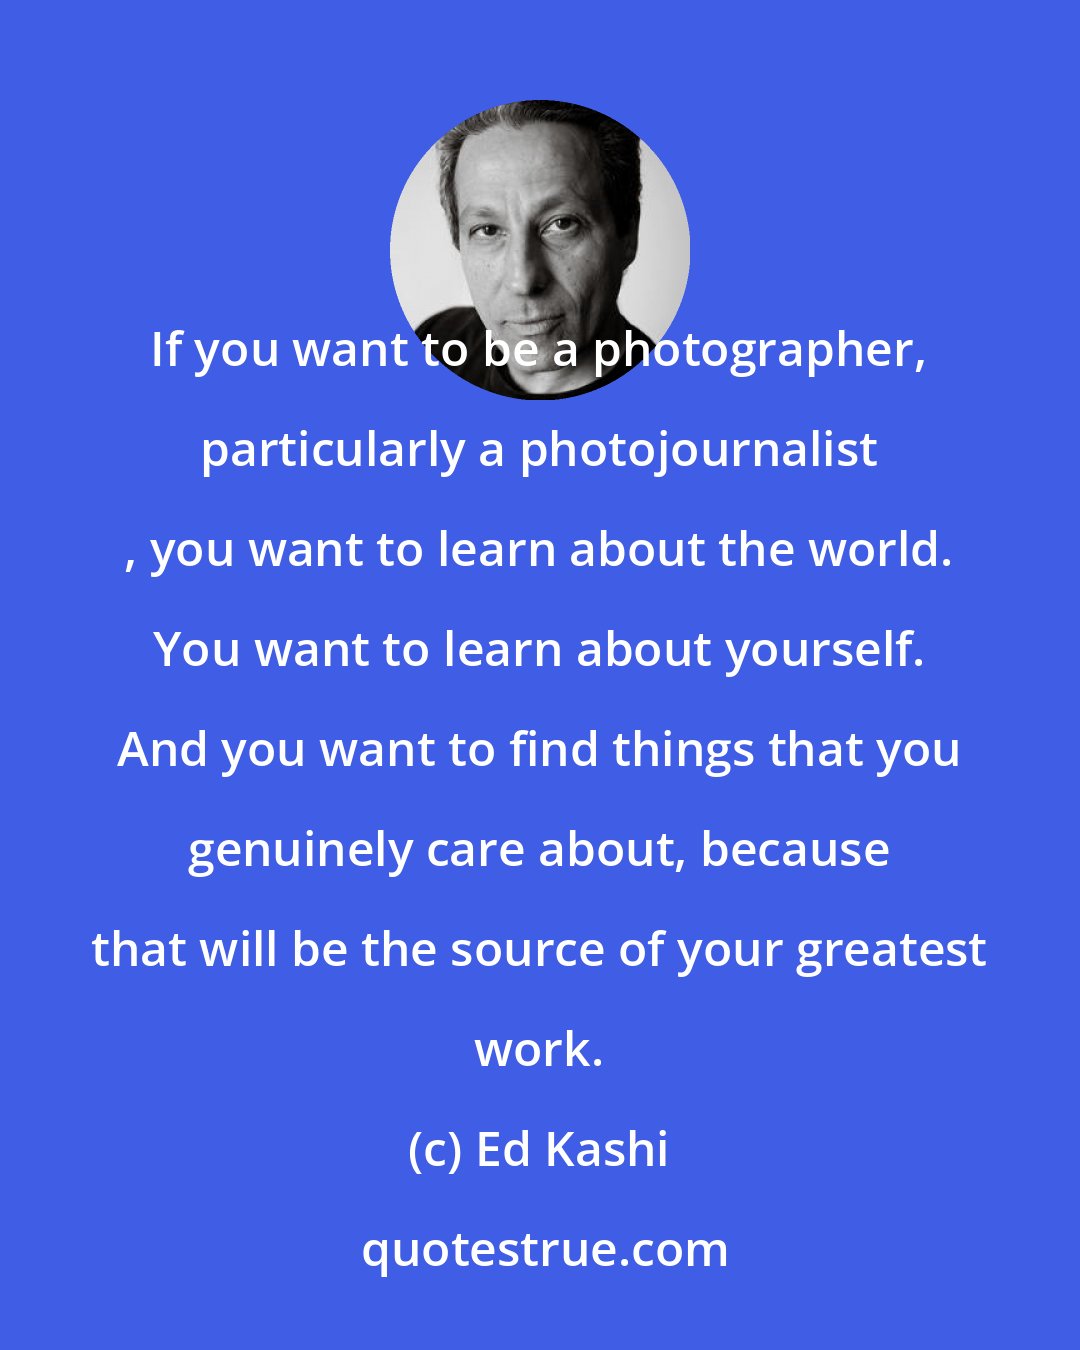 Ed Kashi: If you want to be a photographer, particularly a photojournalist , you want to learn about the world. You want to learn about yourself. And you want to find things that you genuinely care about, because that will be the source of your greatest work.